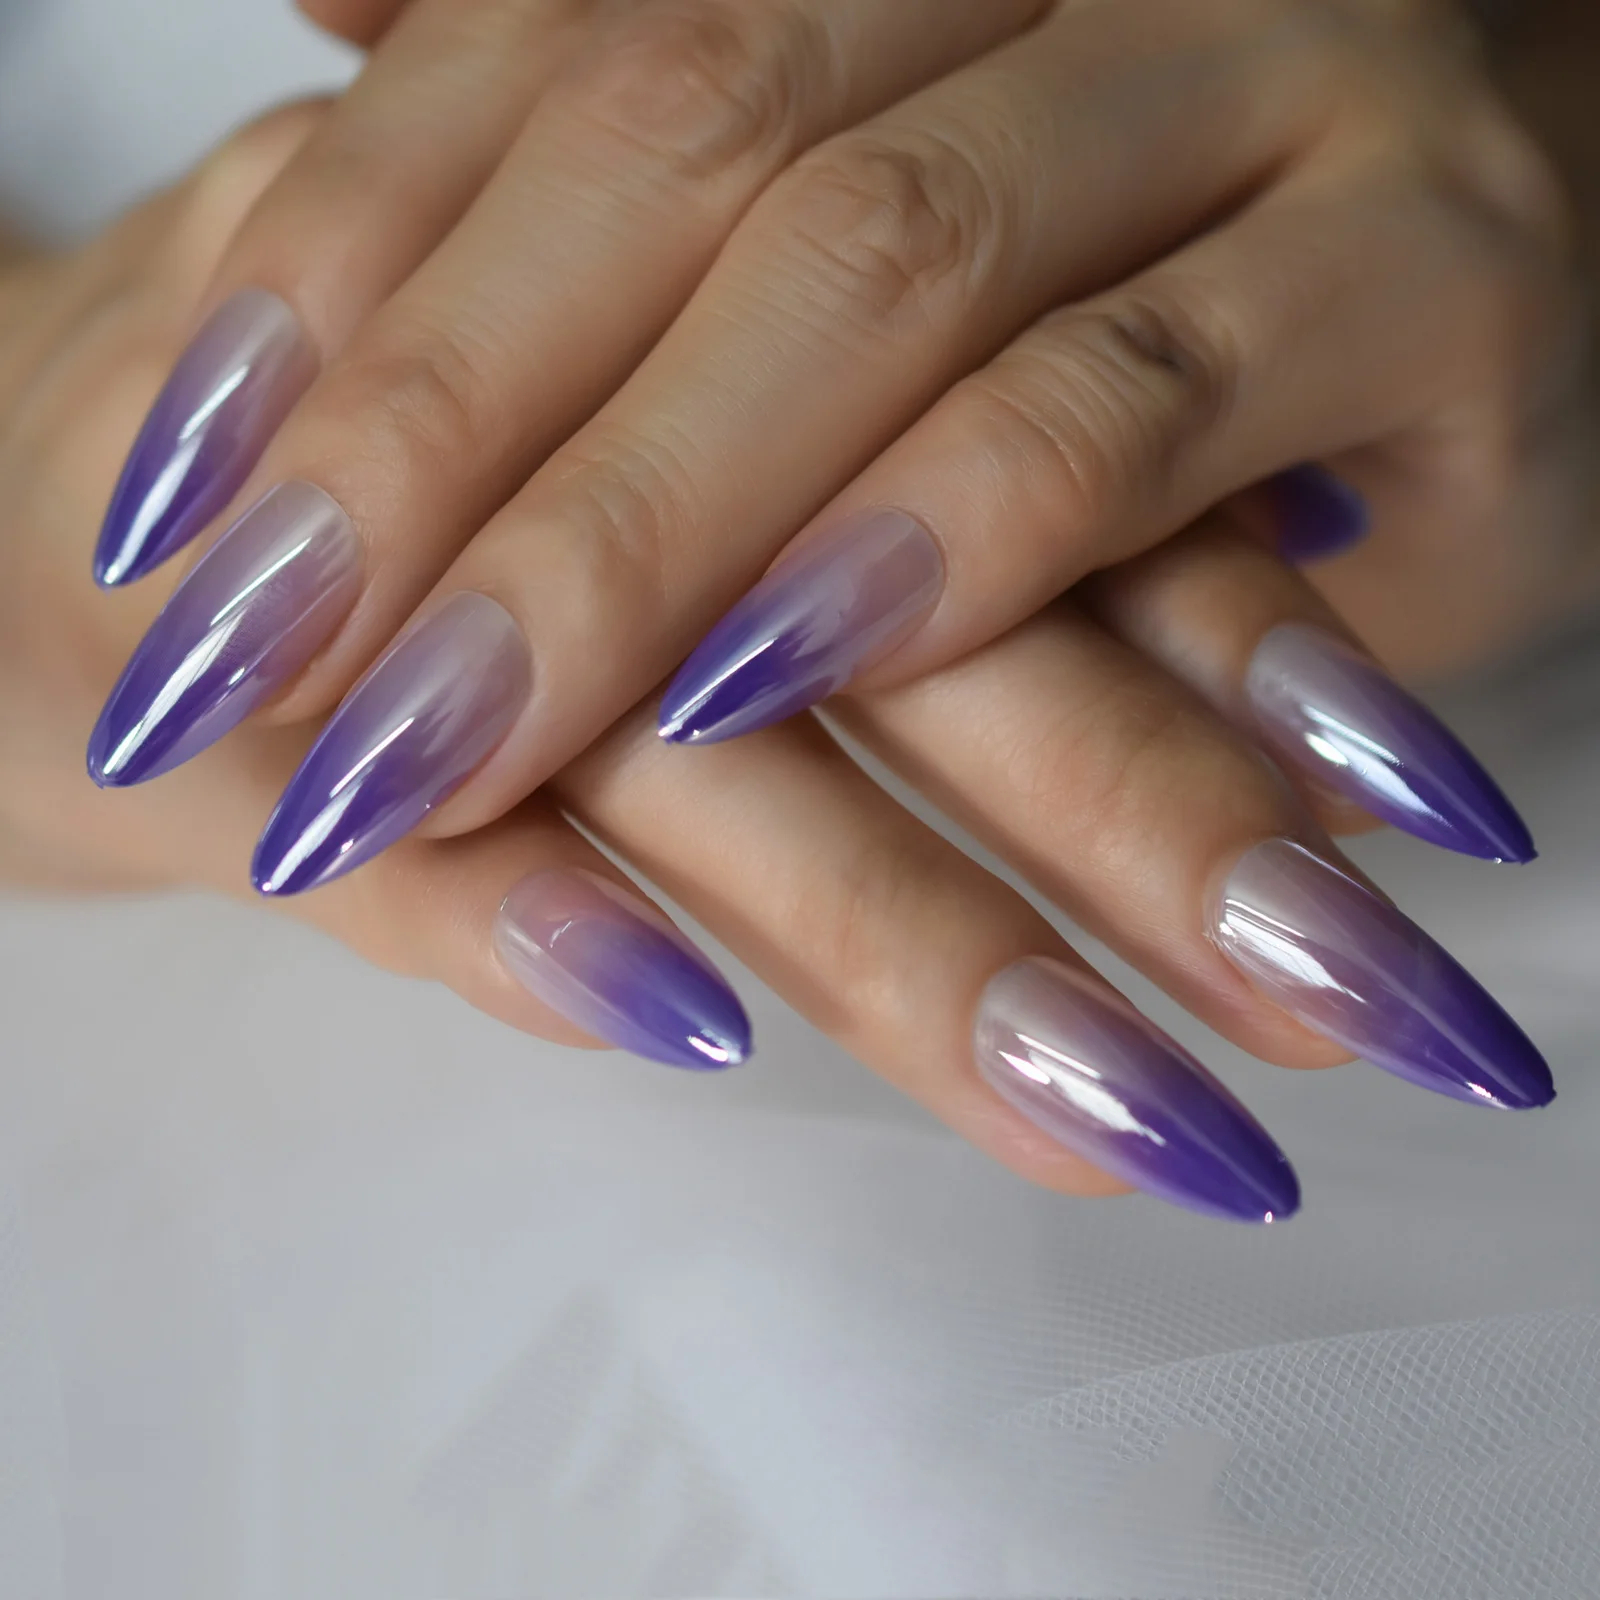 Save Big on Ombre Nails – Gradient Perfection at Discounted Prices!.